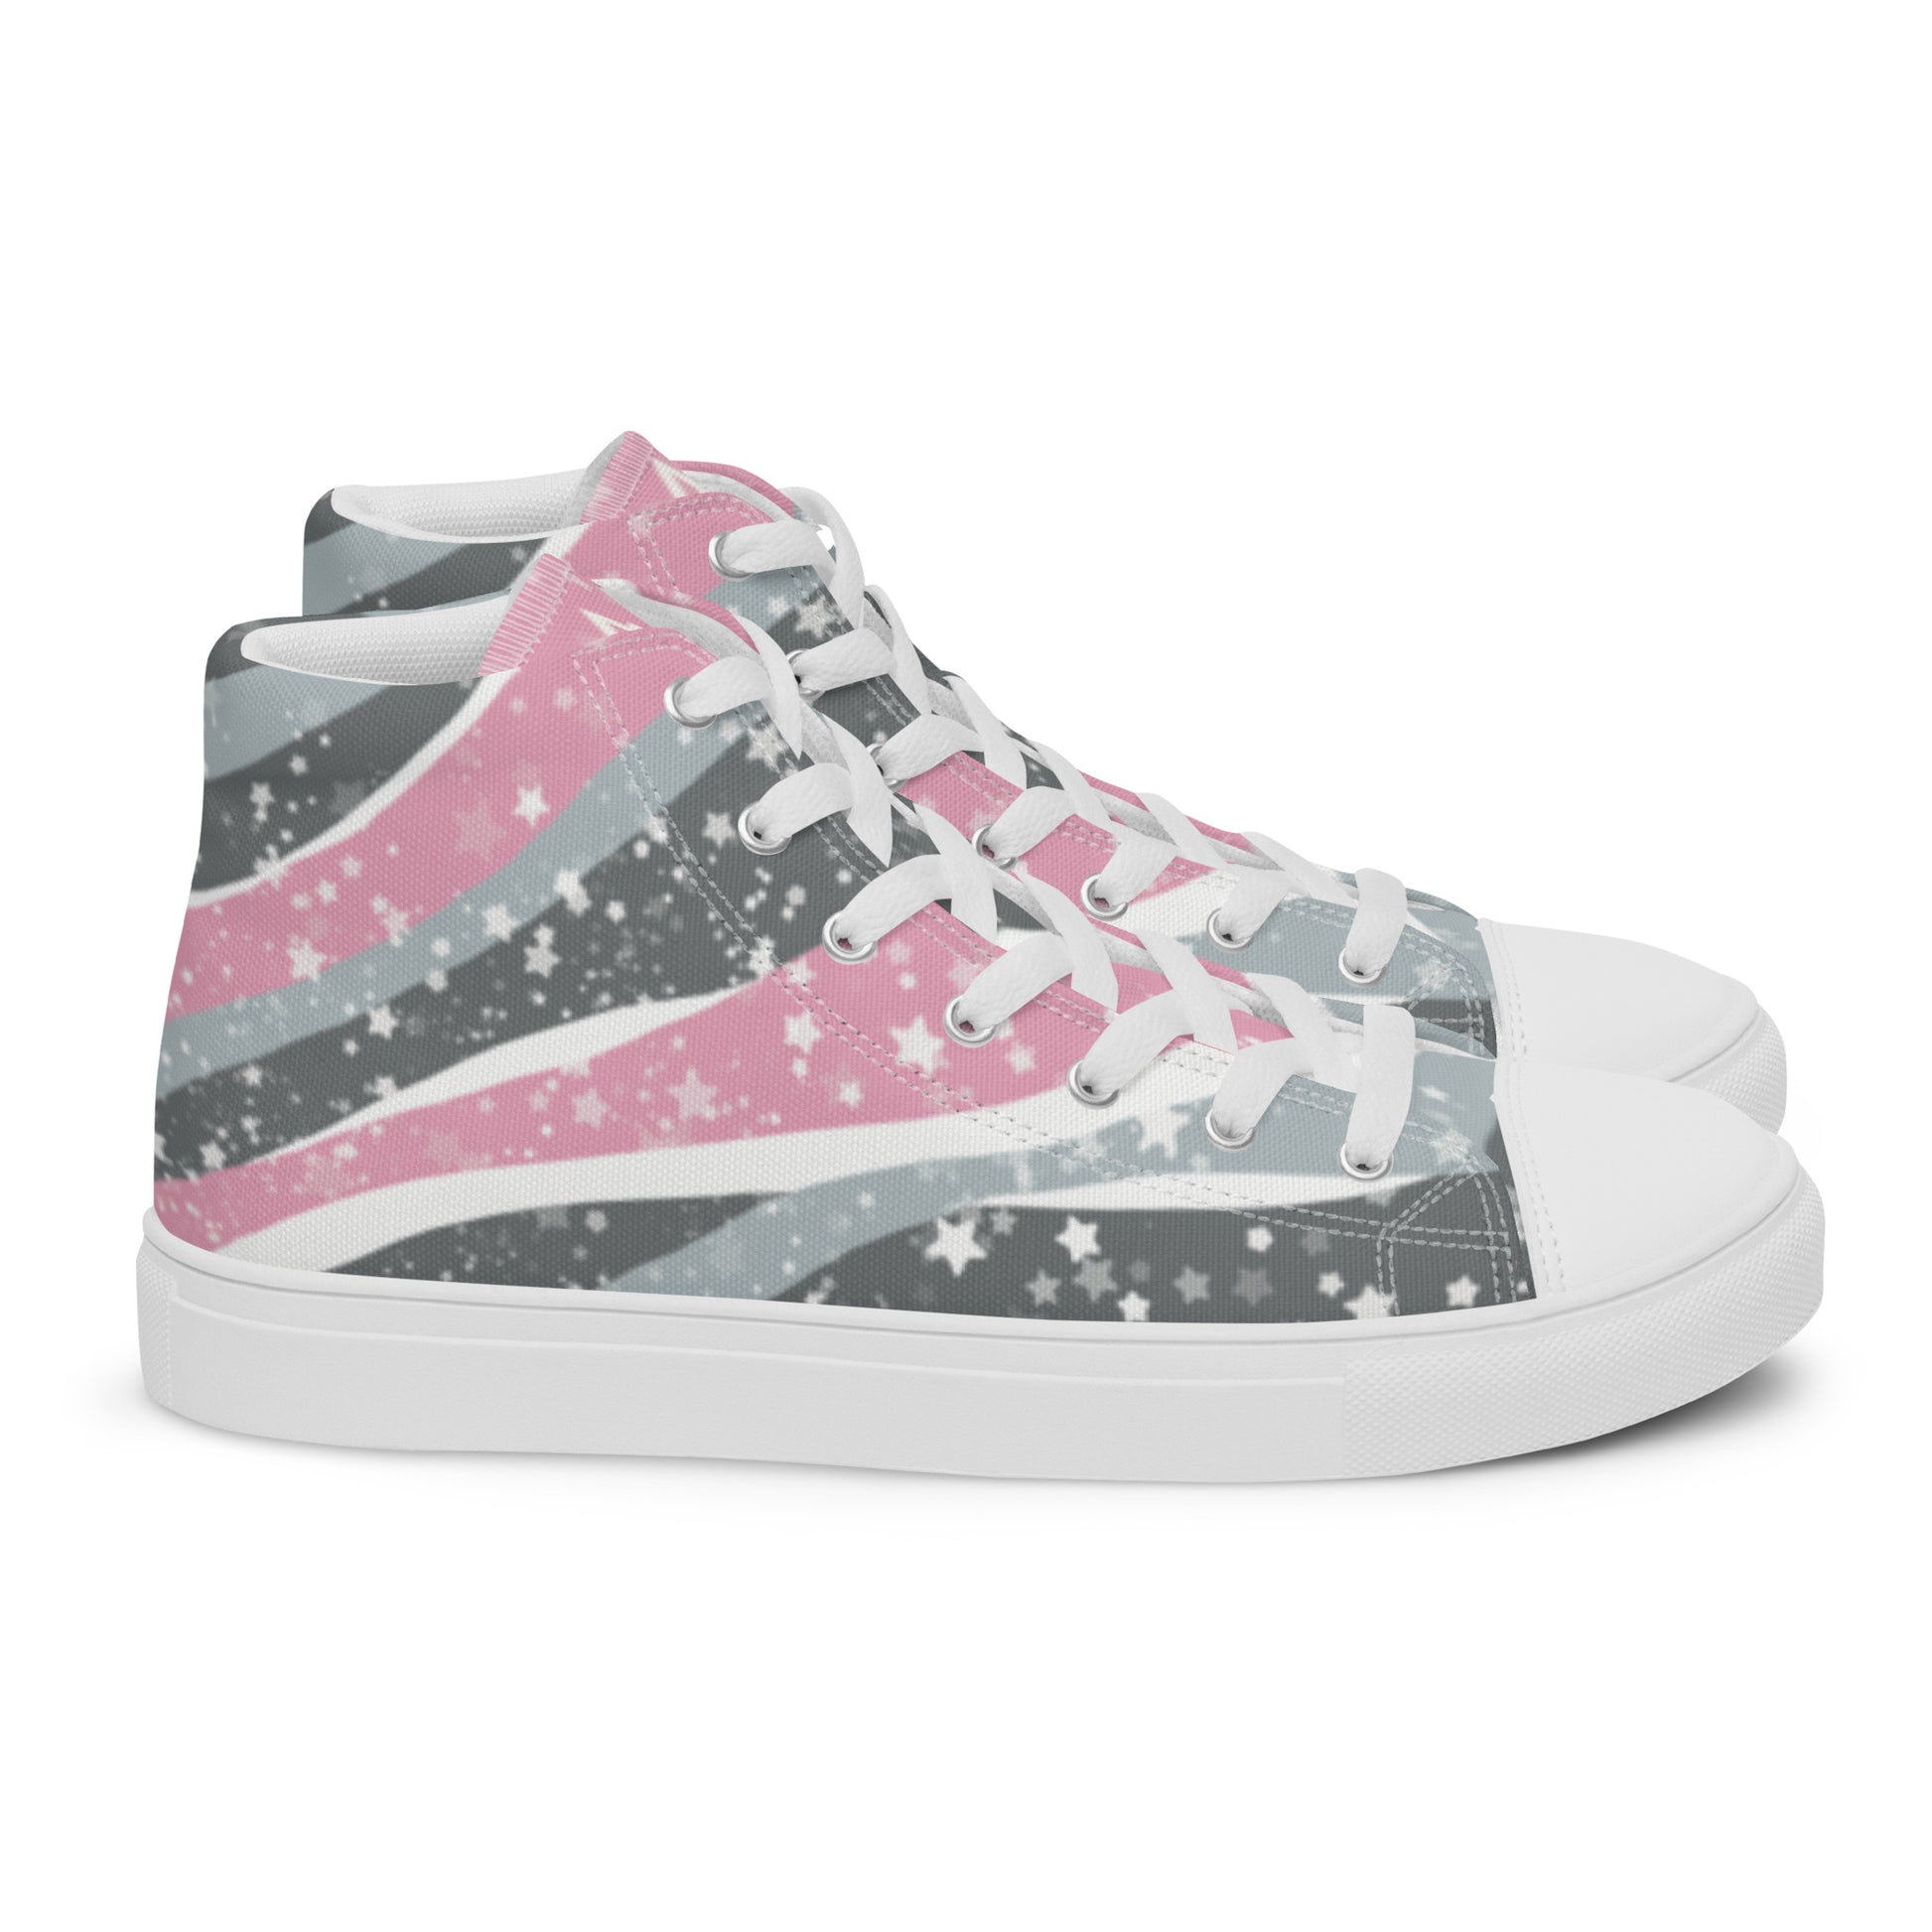 Right view: A pair of high top shoes with ribbons of the demigirl flag colors and stars coming from the heel and getting larger across the shoe to the laces.